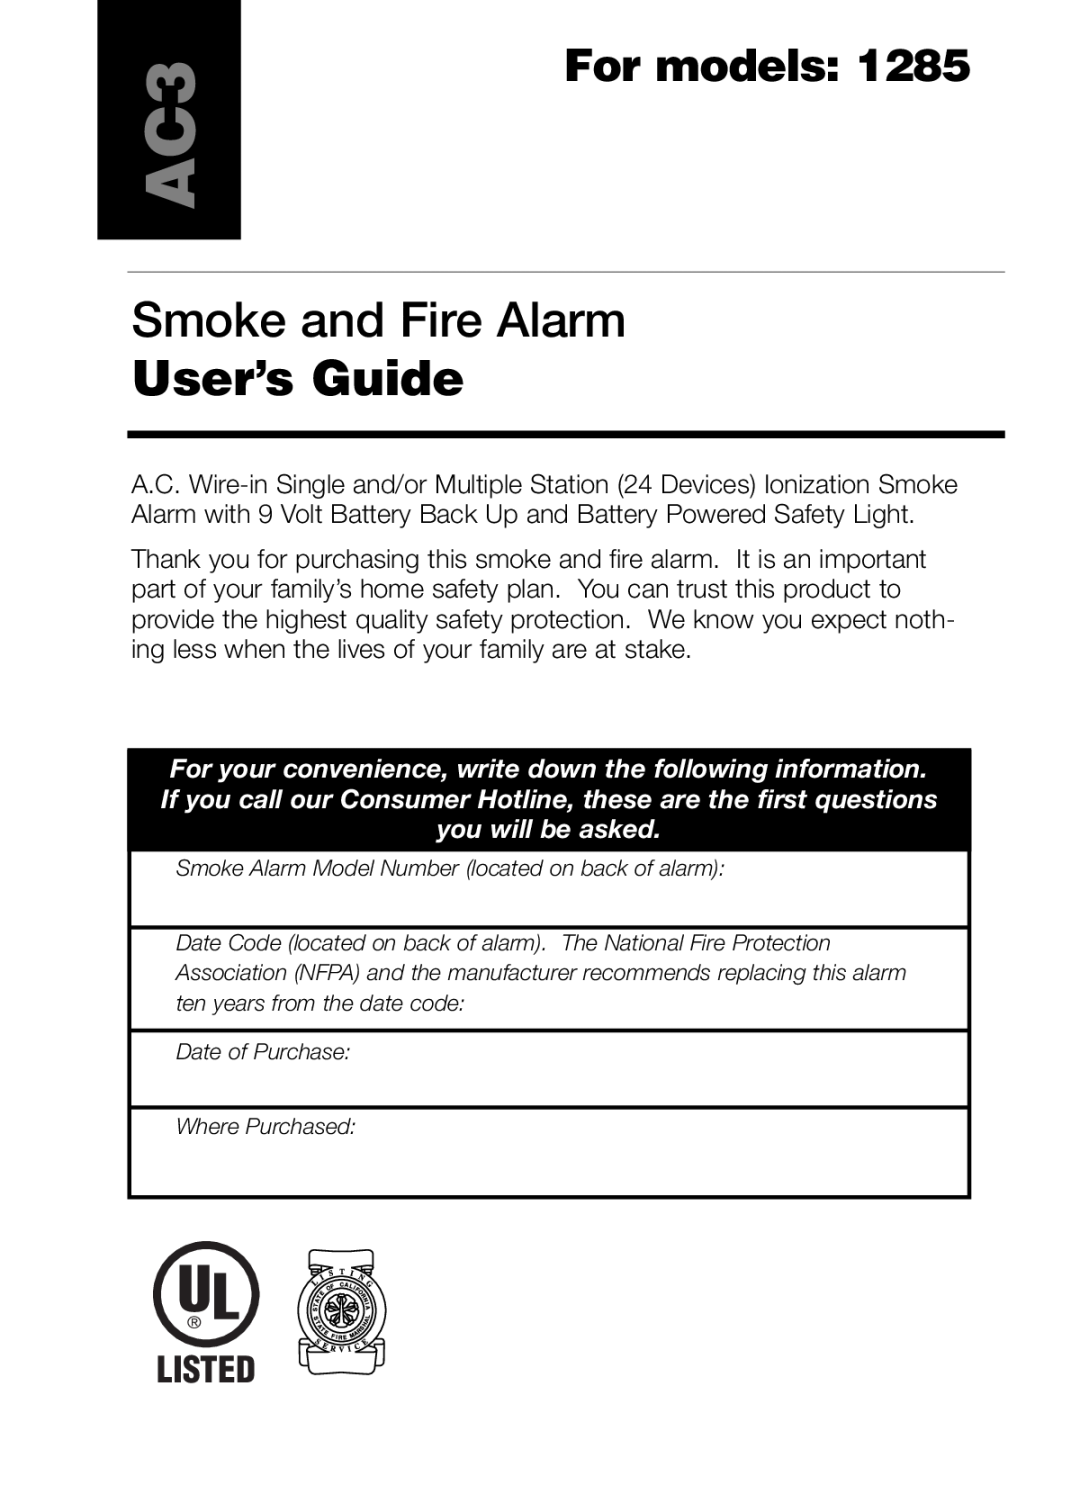 Kidde 1285 manual Smoke and Fire Alarm, User’s Guide, For models, Listed 